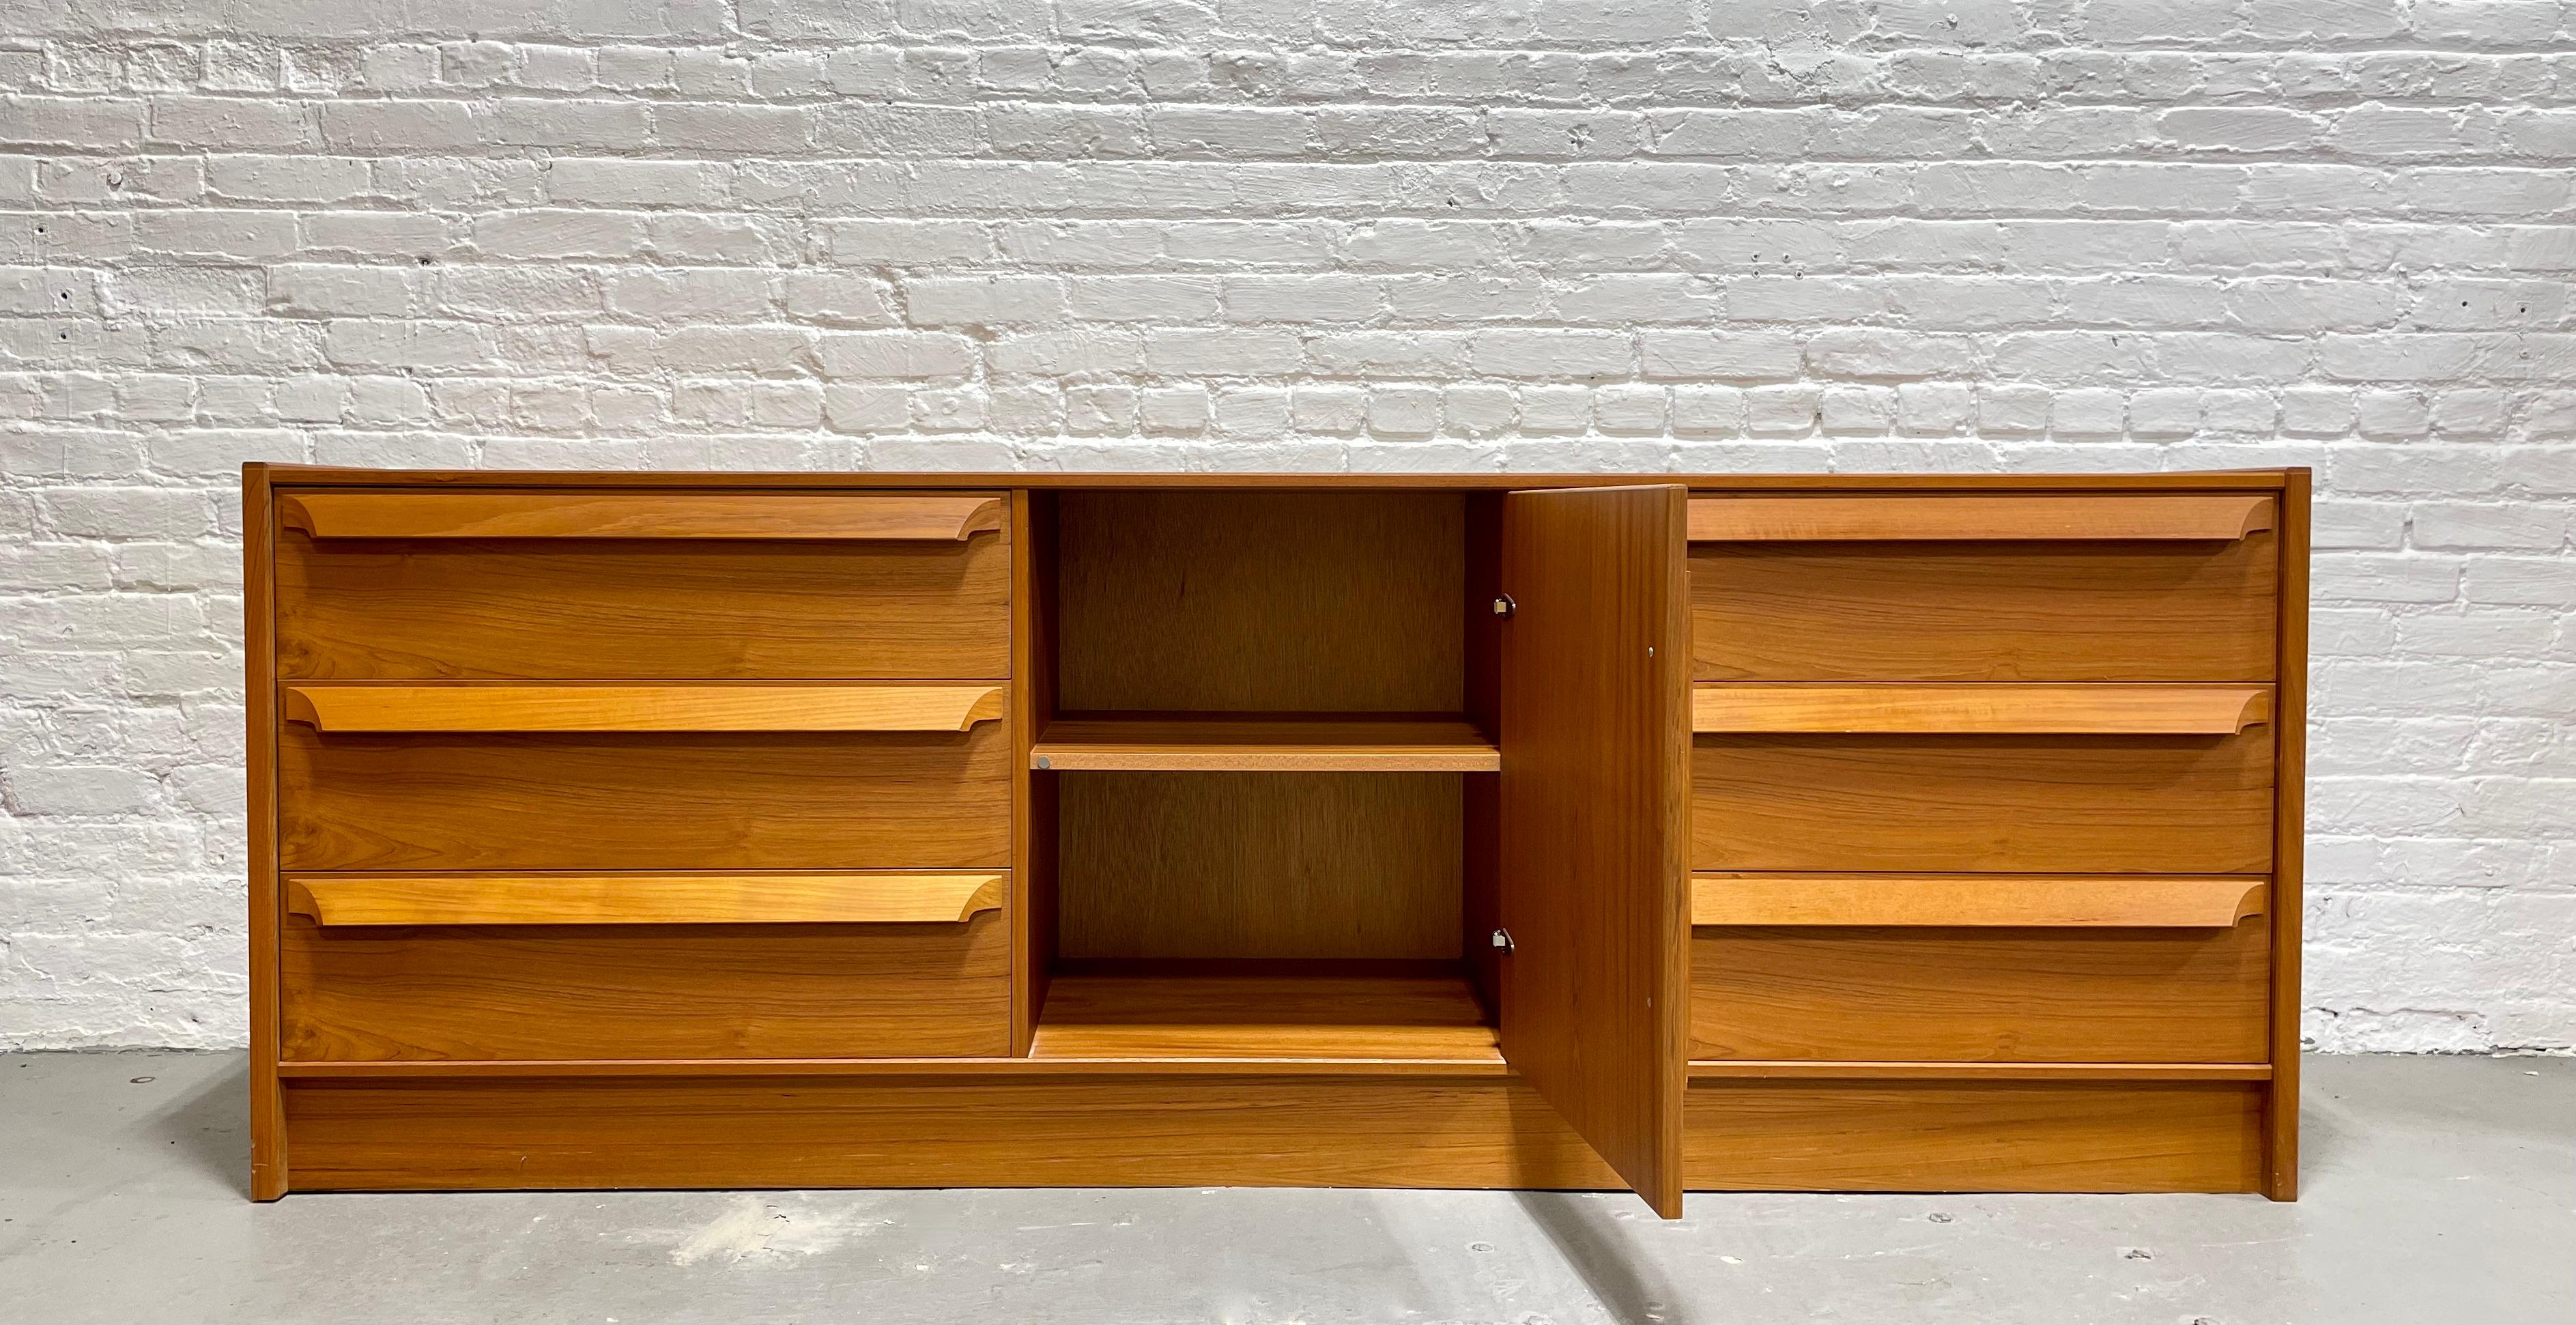 Sculpted Mid-Century Modern danish teak credenza / long dresser by Skovby Mobelfabrik. This gorgeous credenza features loads of storage space in a thoughtful combination of drawers and shelving space. Constructed in teak with lovely wood grains and